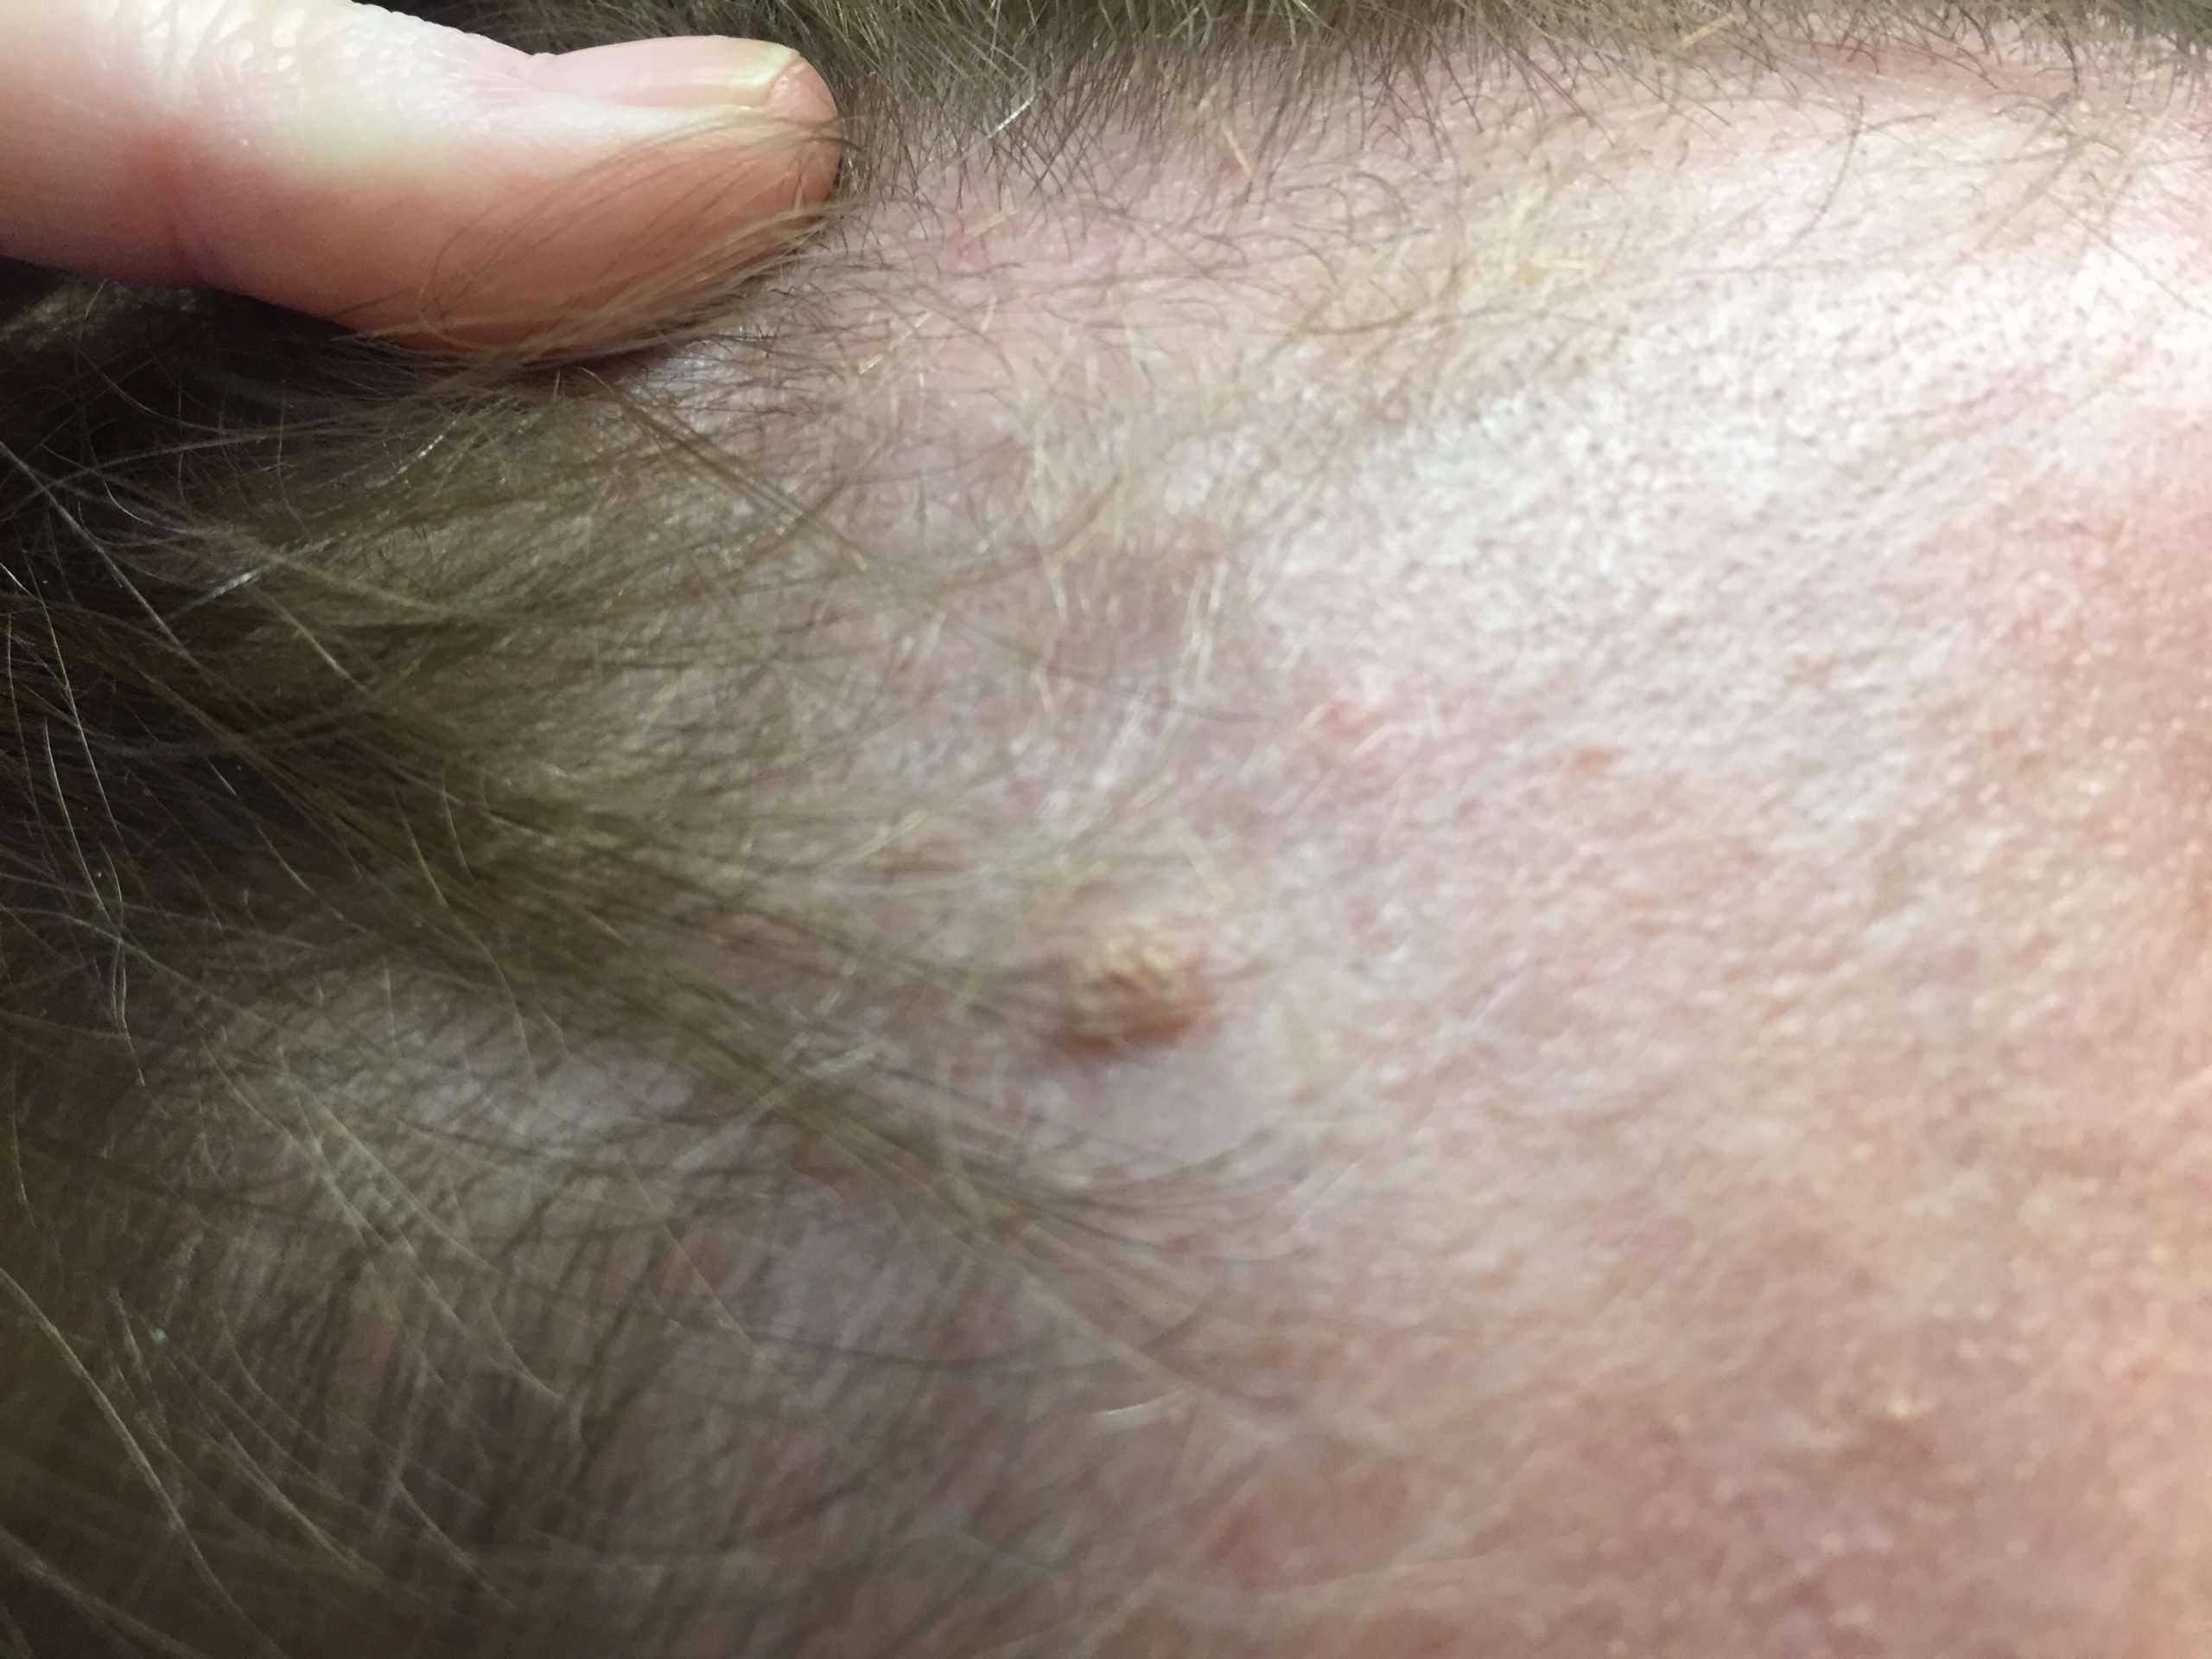 Does this look like basal cell carcinoma? : Dermatology